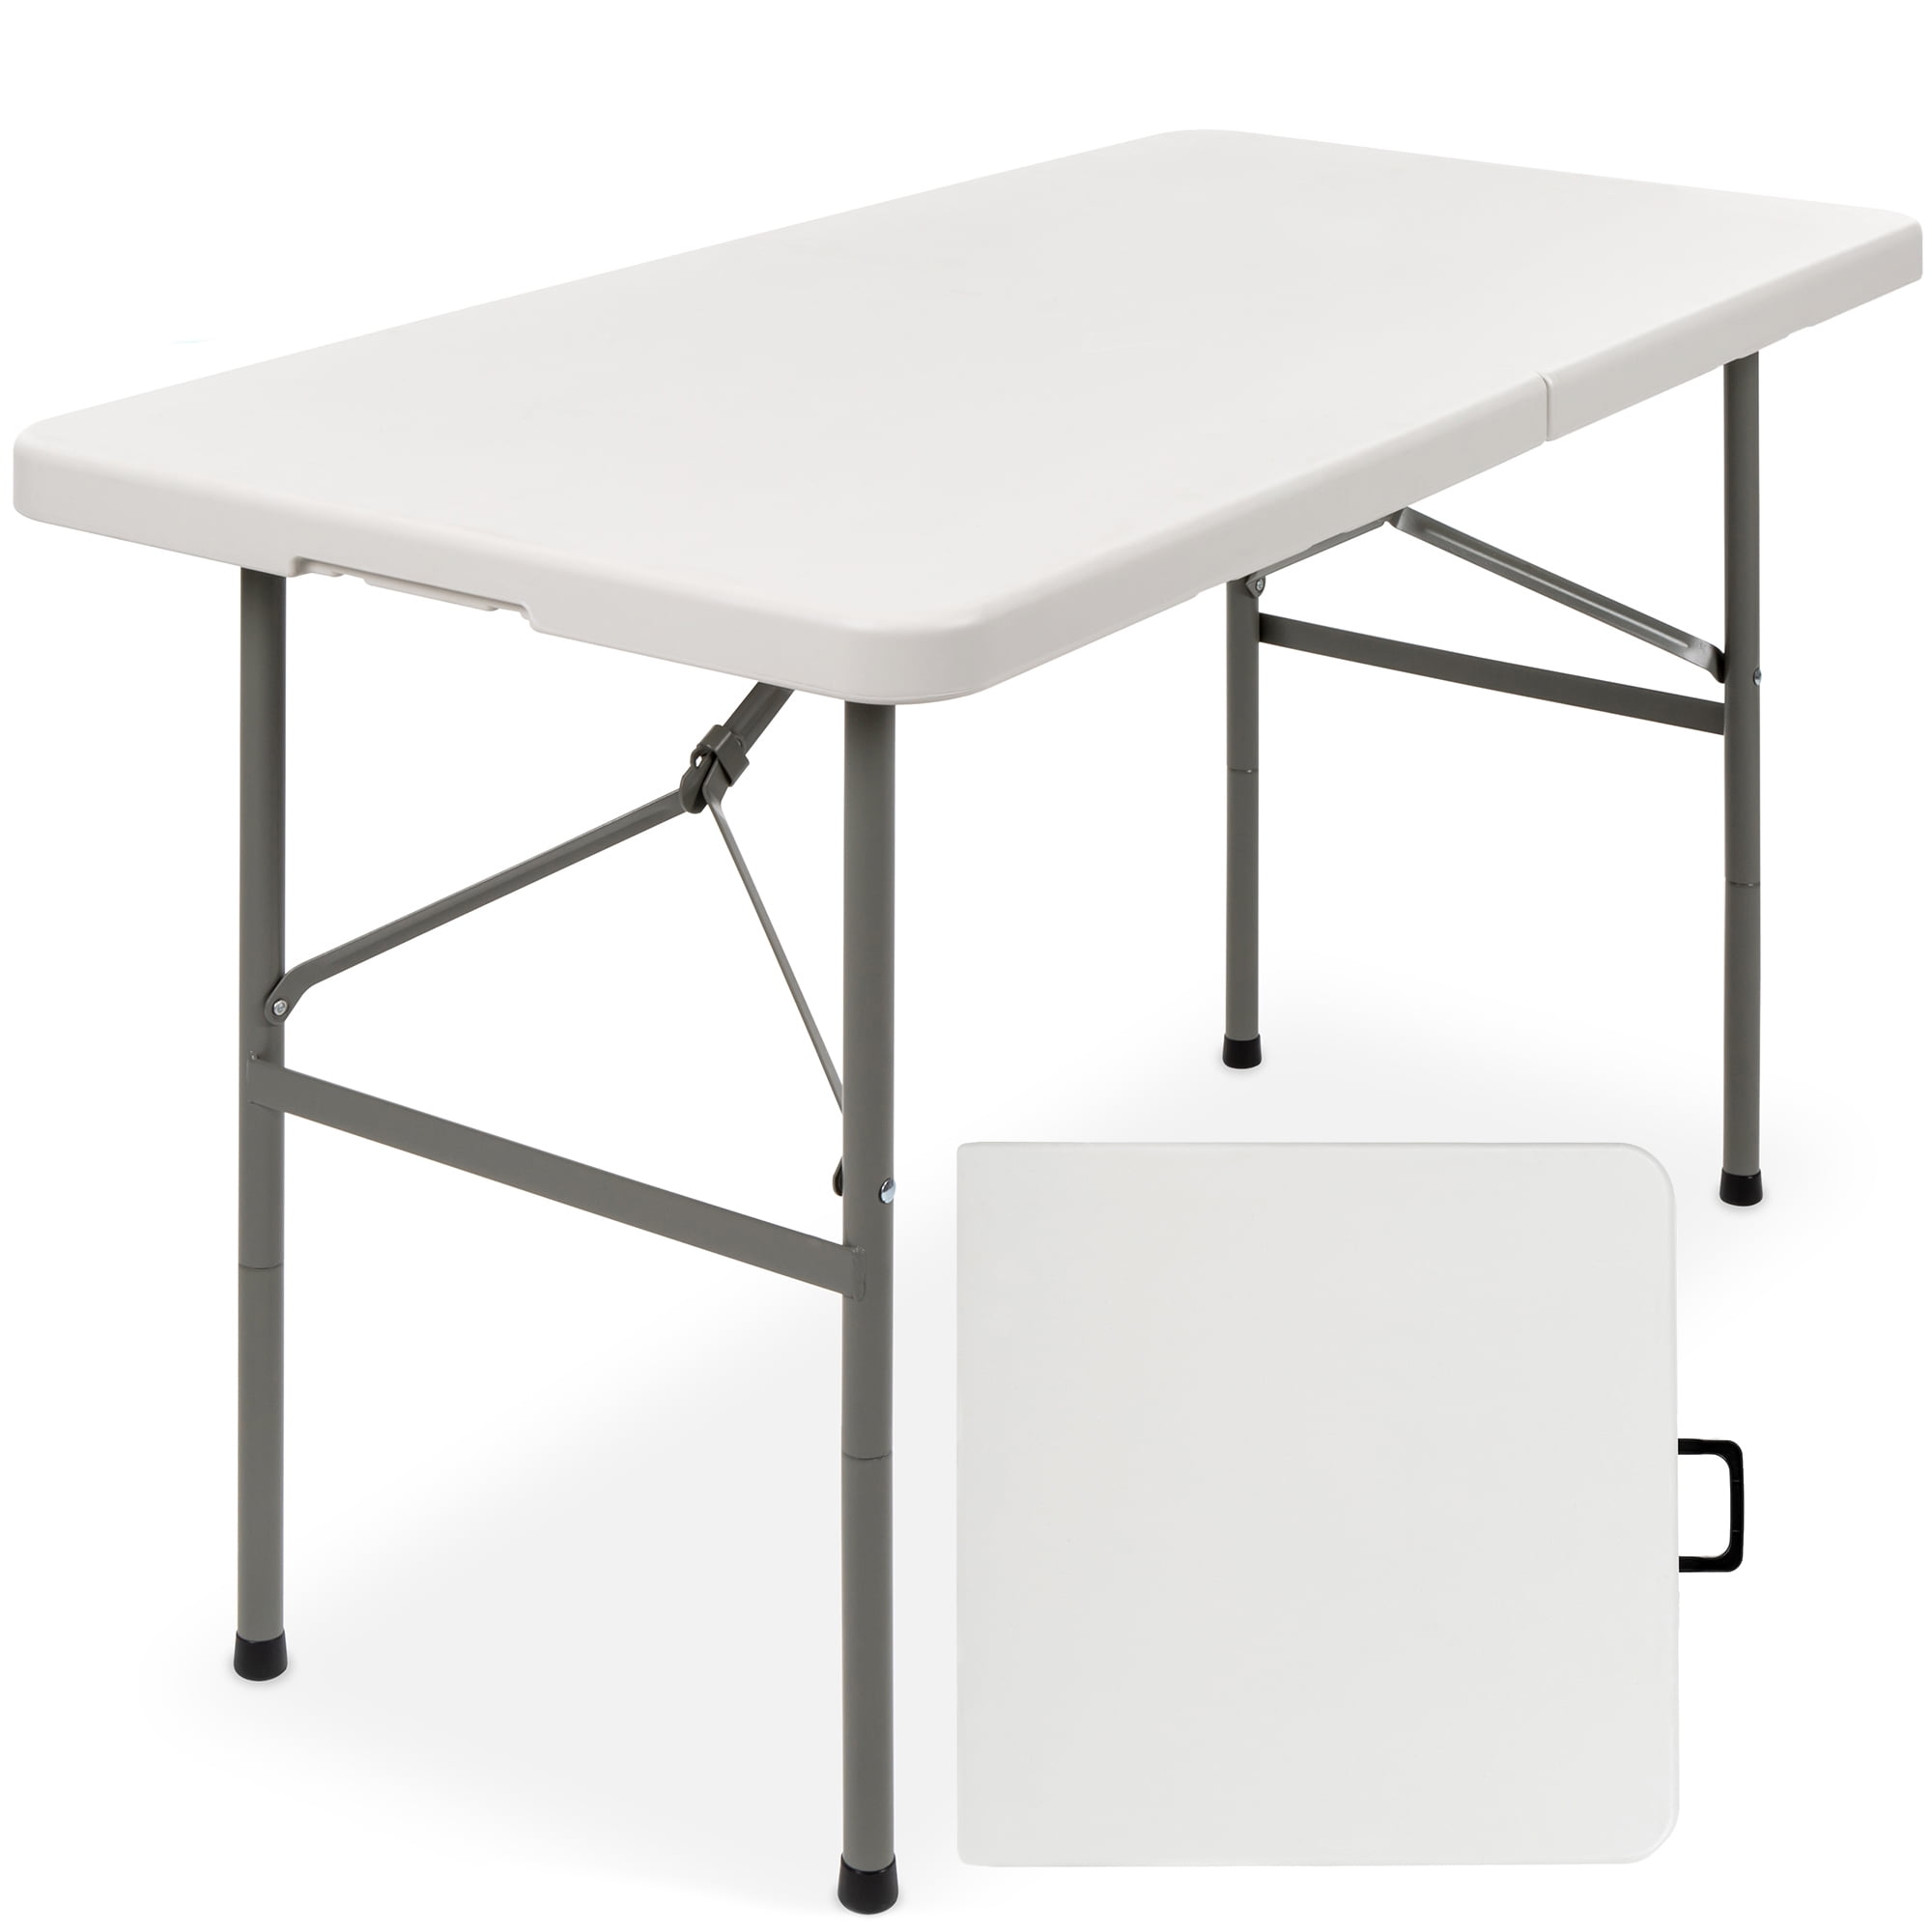 Lifetime 80160 Commercial Height Adjustable Folding Utility Table 4 Ft Fast S&H 